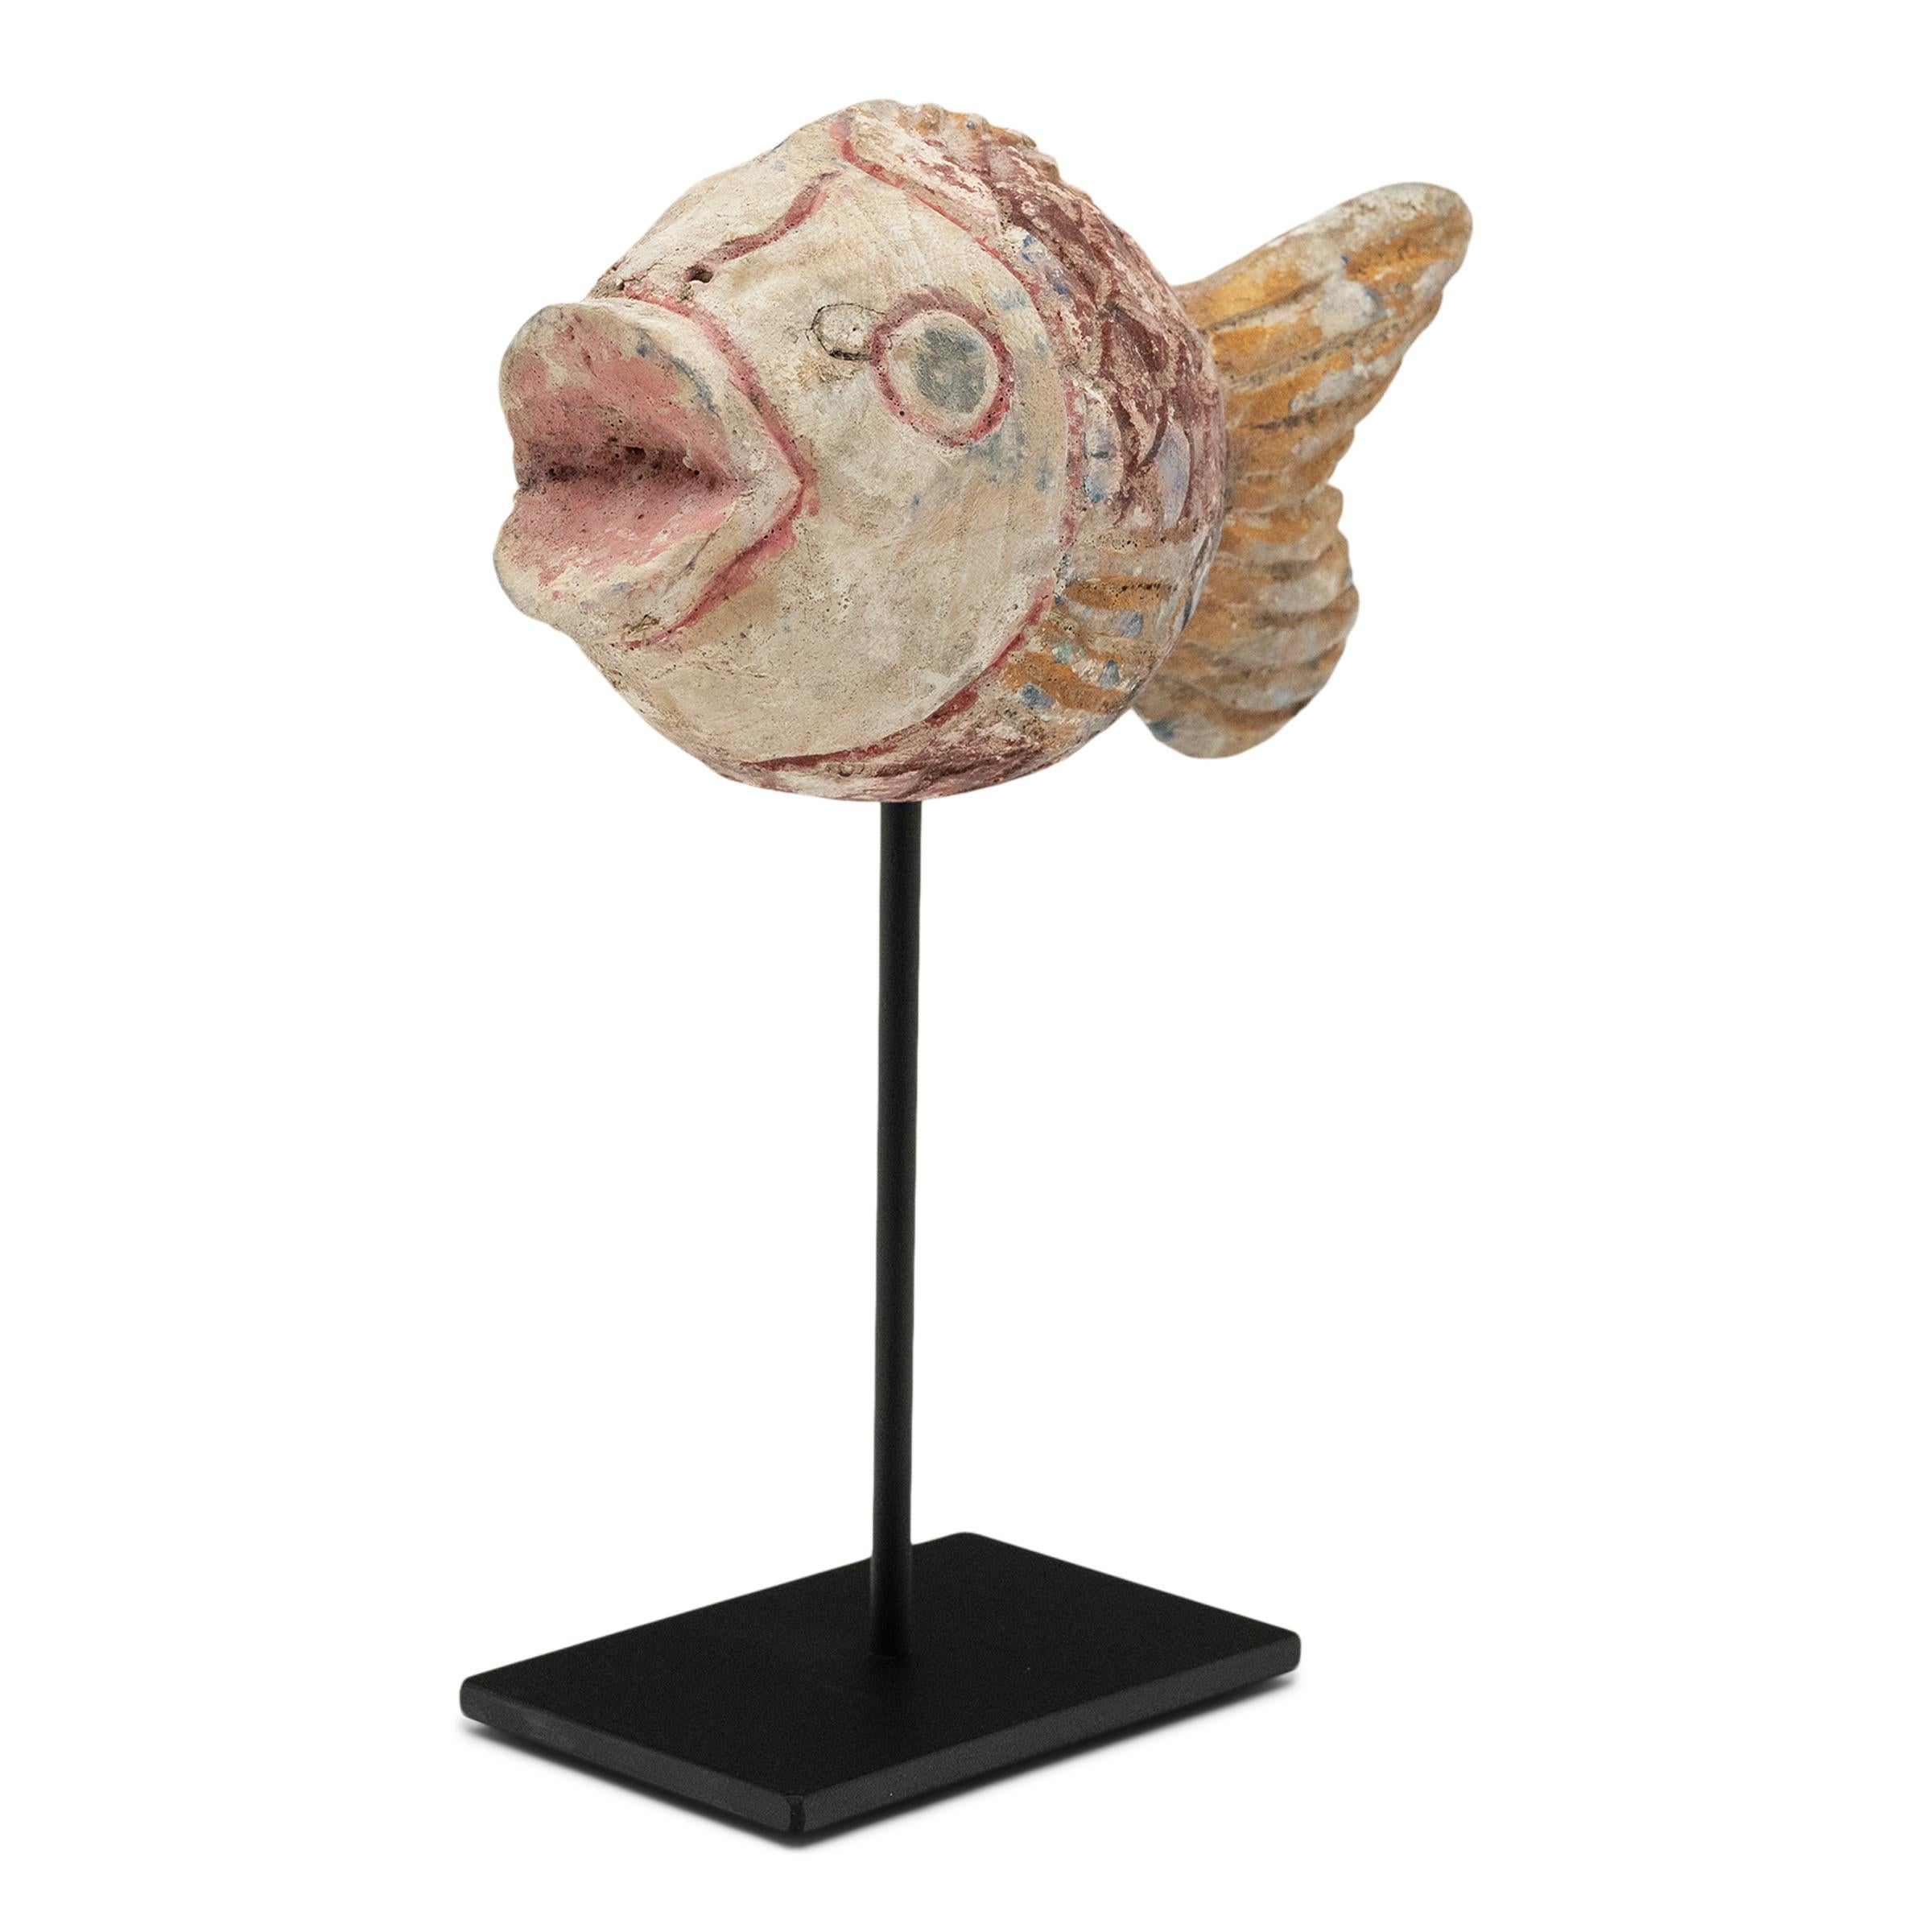 Hand-crafted from reclaimed wood, this artisanal koi sculpture is a traditional symbol of harmony and luck. For Buddhists, such a fish represents a freedom from all restraints. The fish is sculpted with a squat, rounded body and decorated with